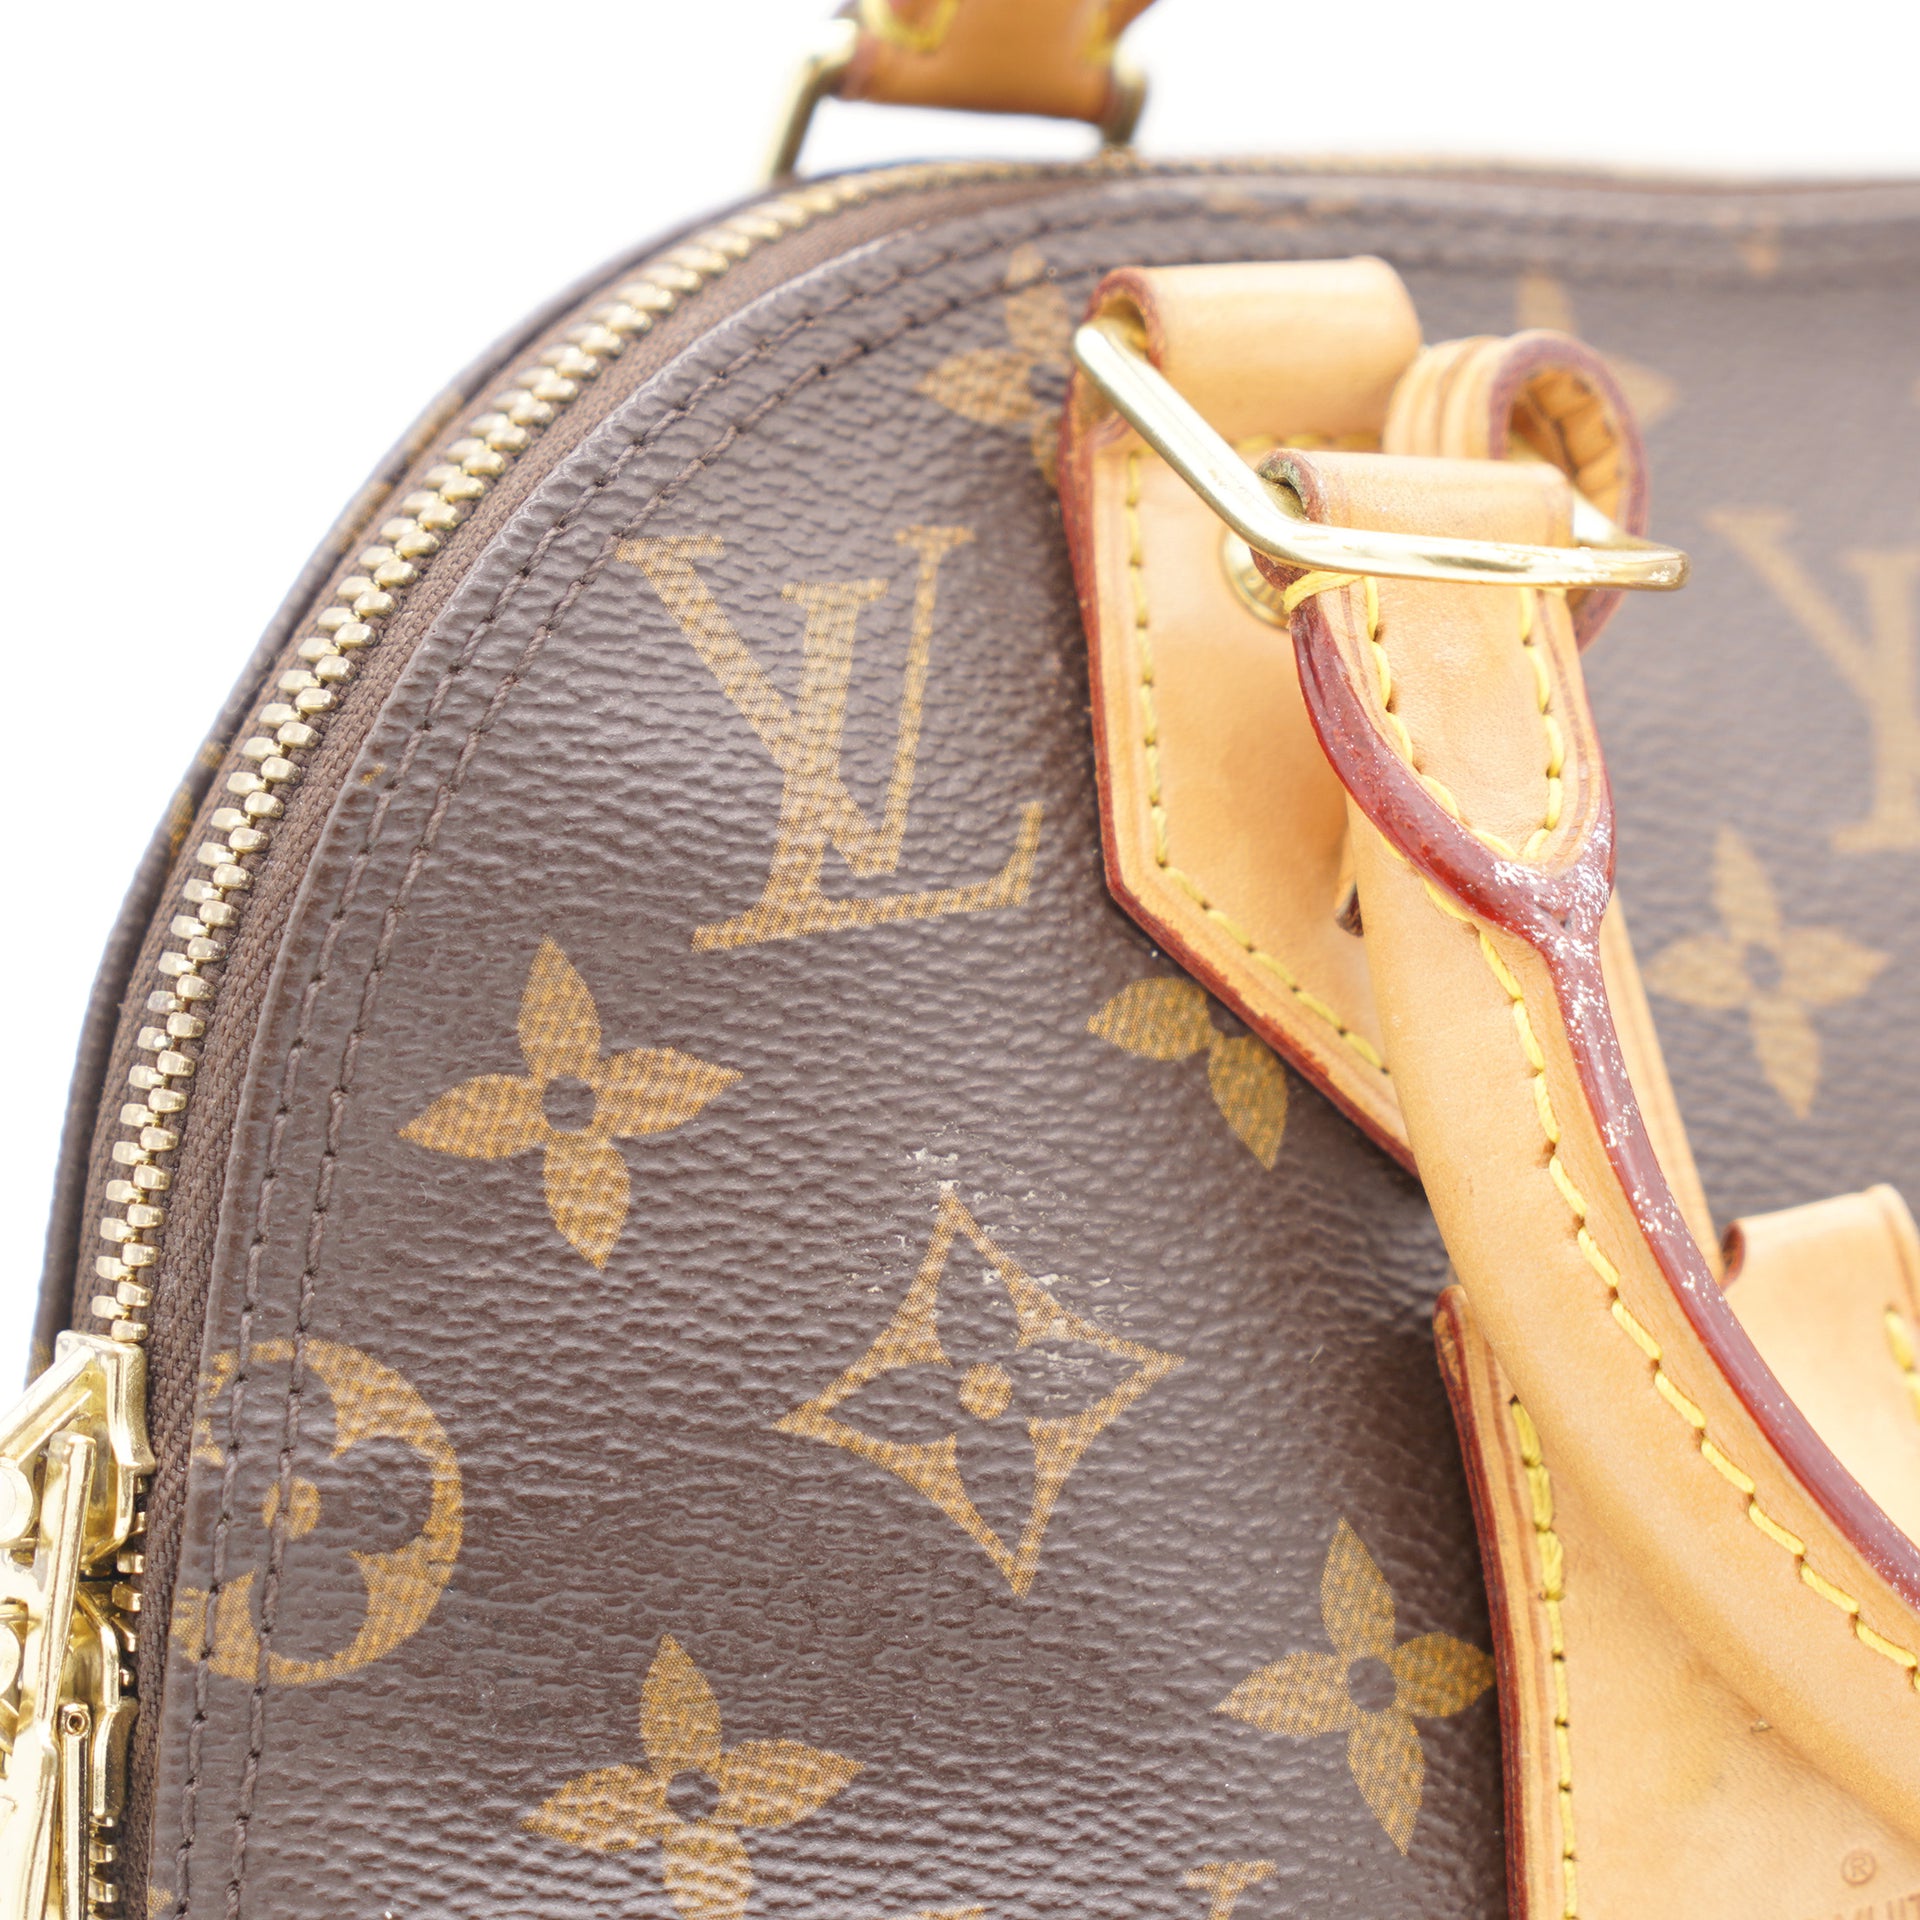 Louis Vuitton HOTSTAMPING MY INITIALS ON MY NEW LOUIS VUITTON ALMA